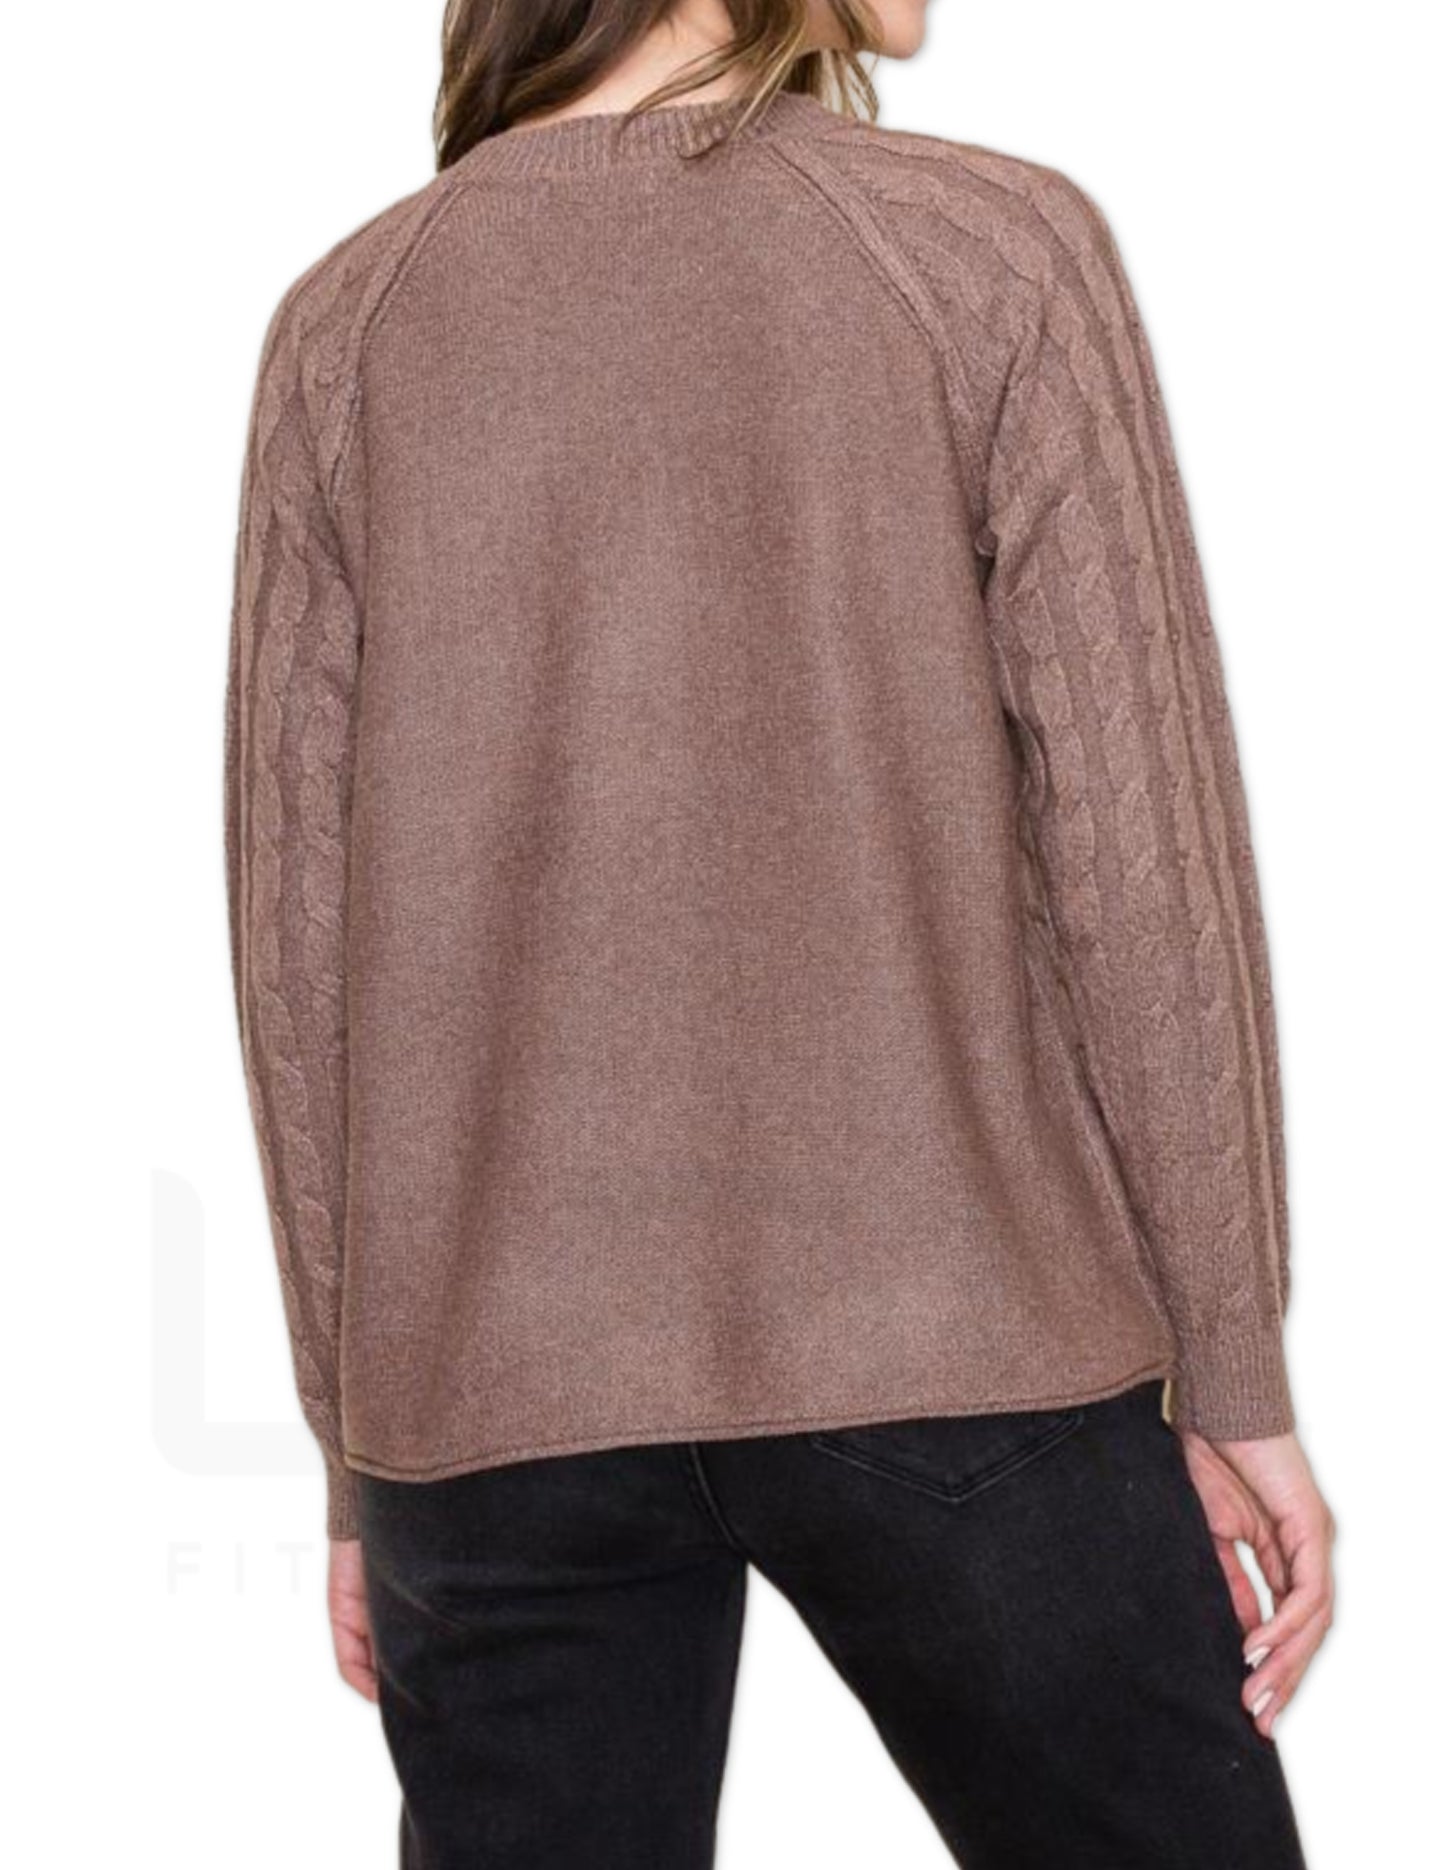 Cable Knit Raglan Sleeve Sweater - Cappuccino